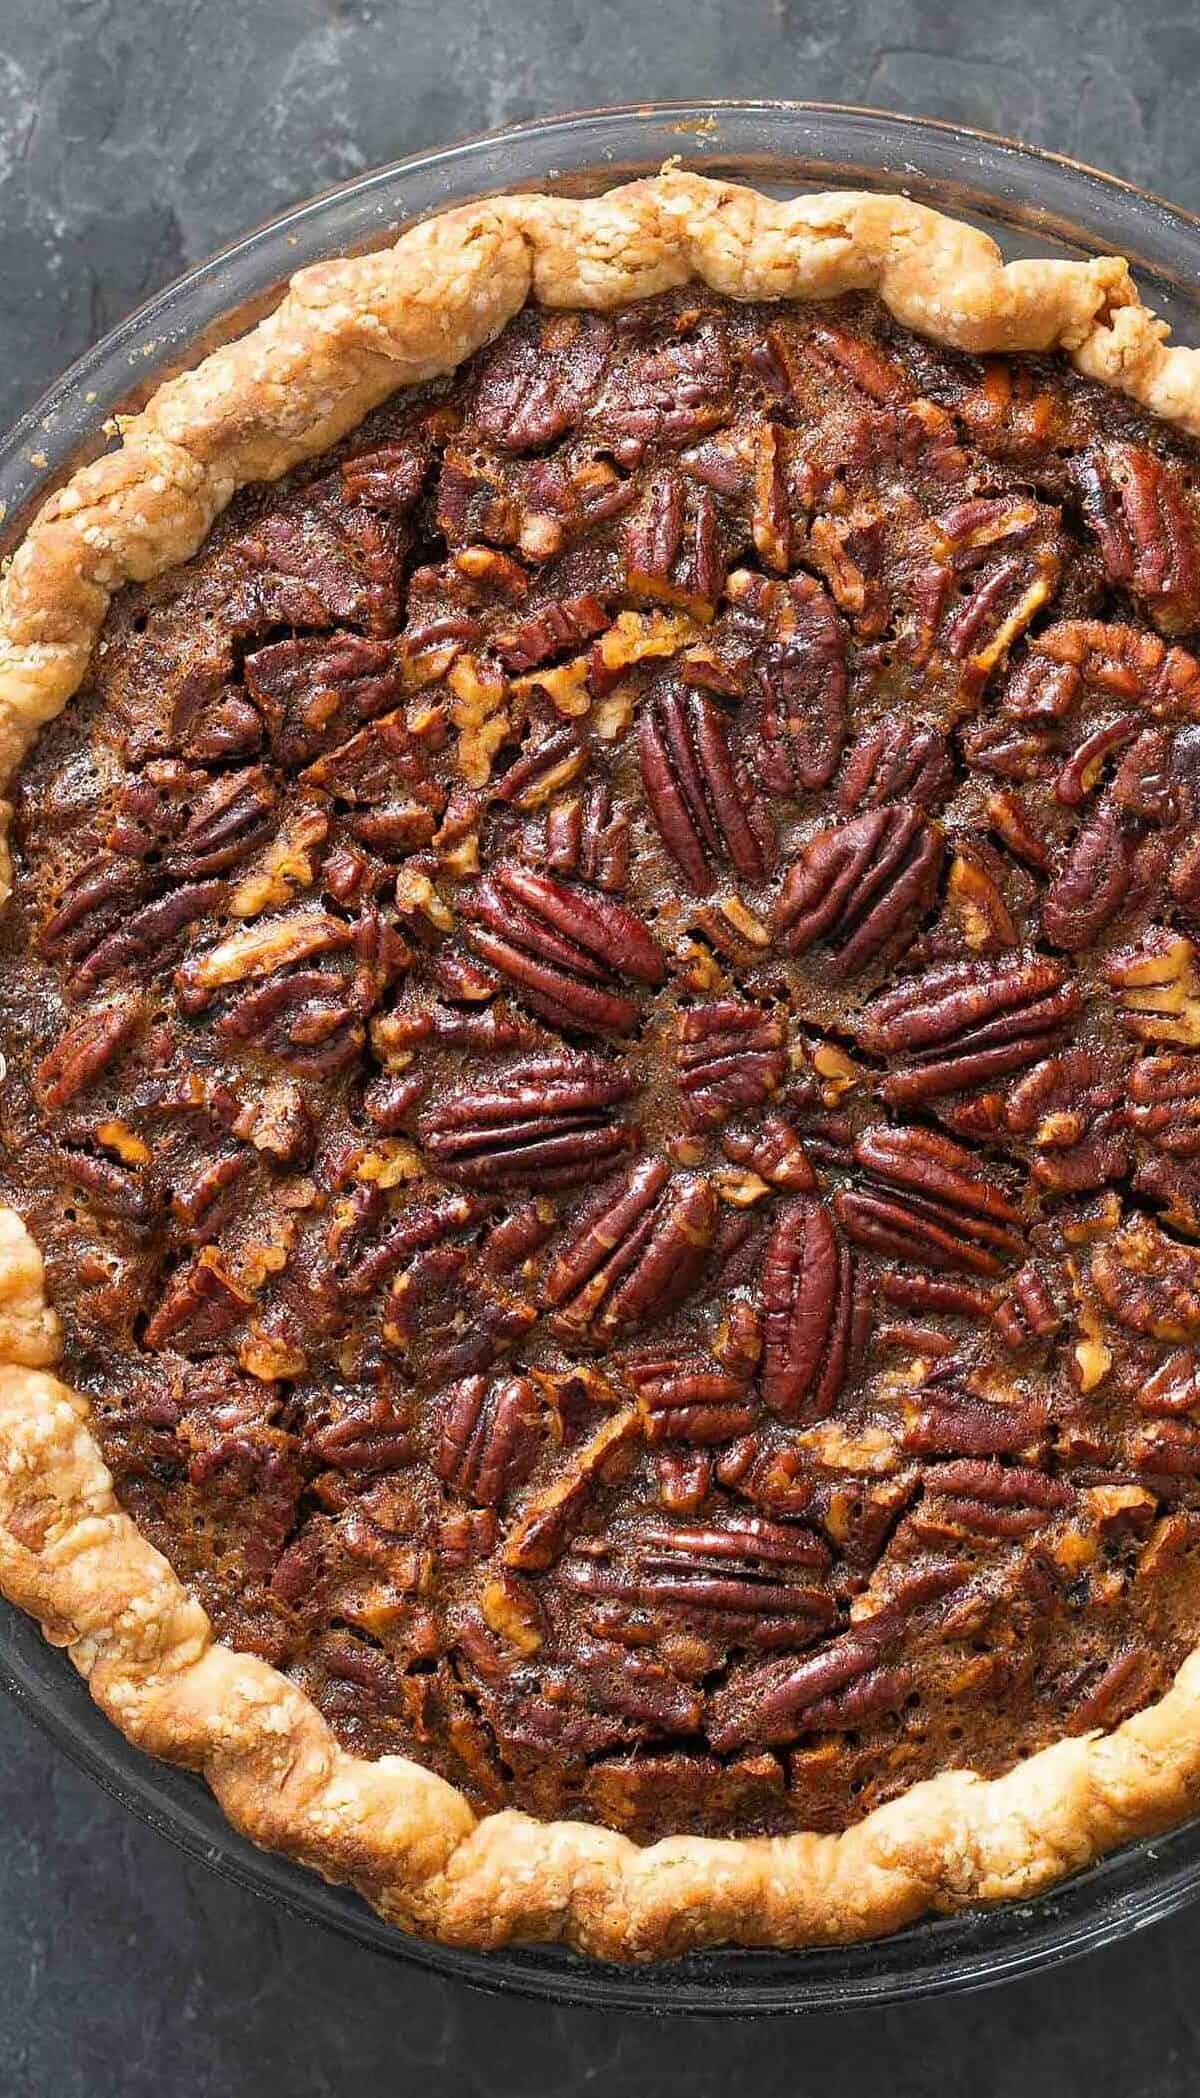  A golden-brown crust, filled with a luscious pecan filling – what's not to love?